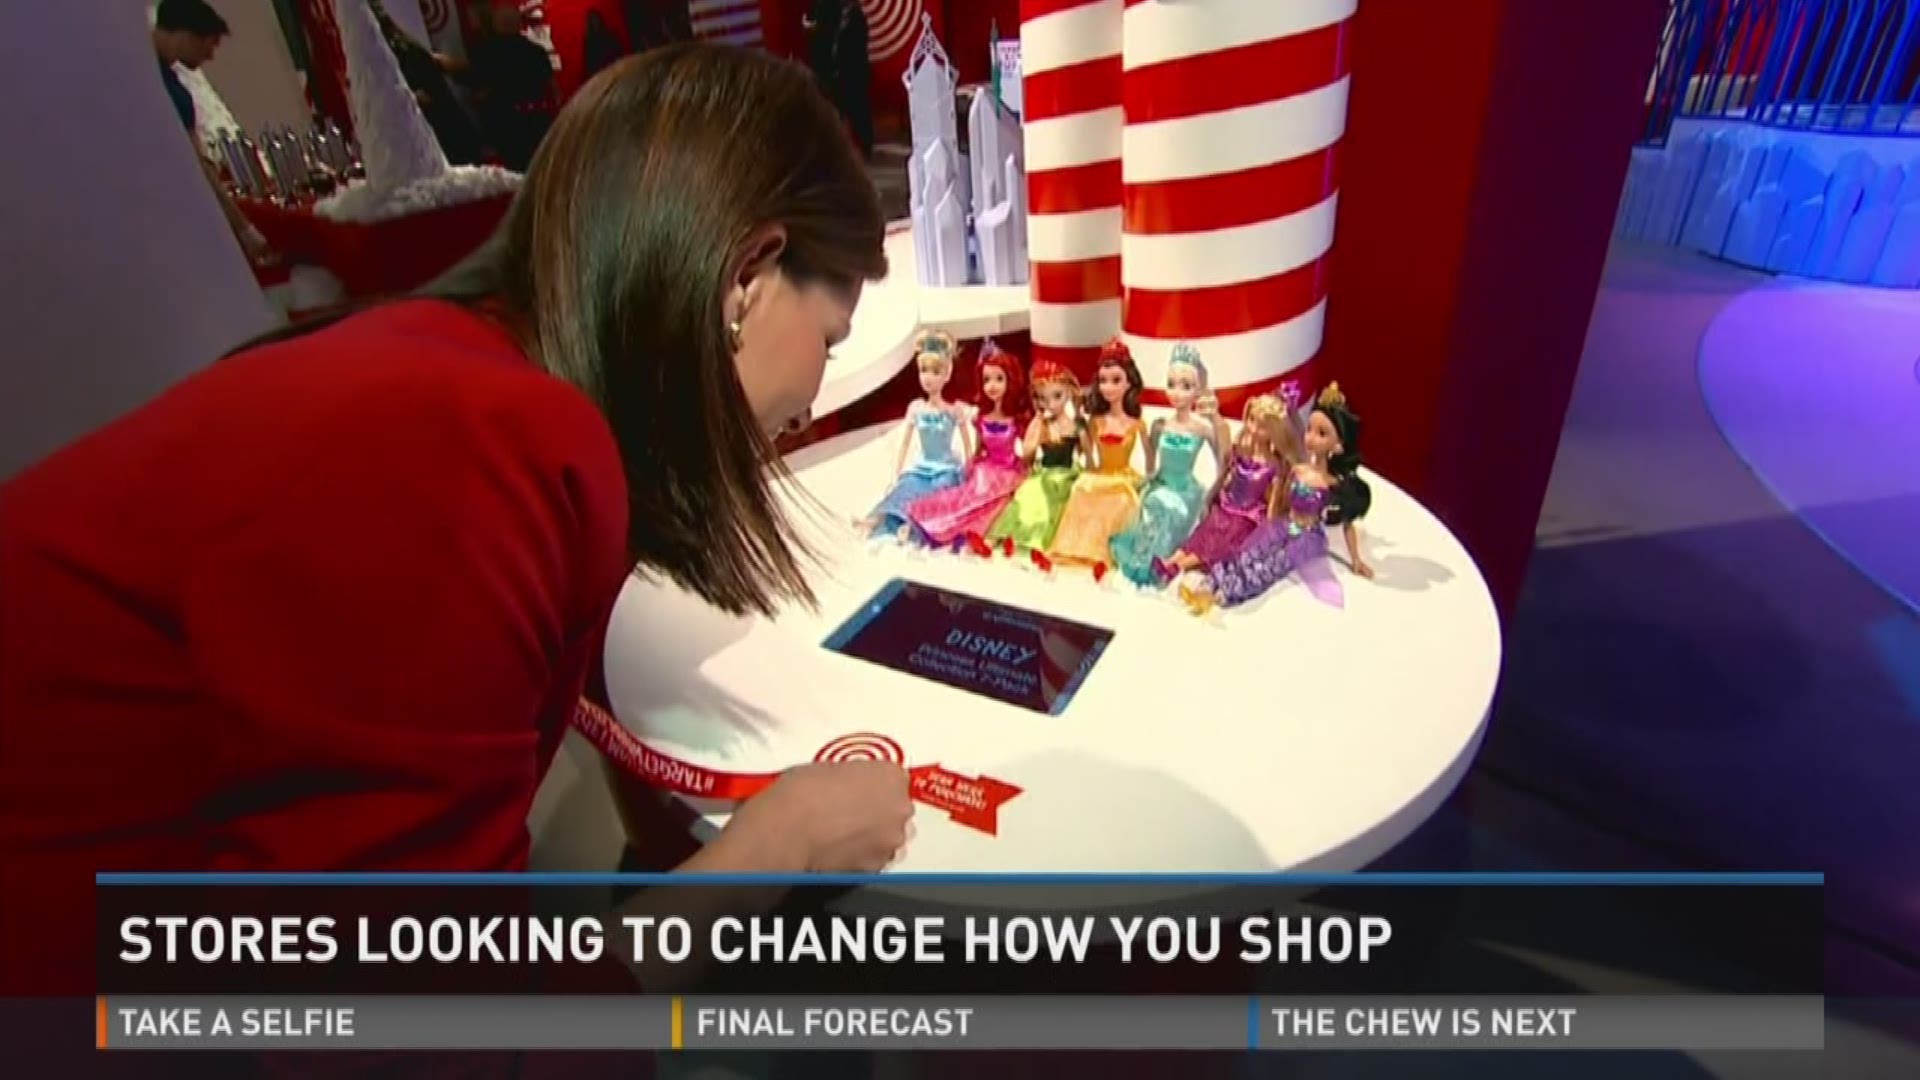 Stores looking to change how you shop